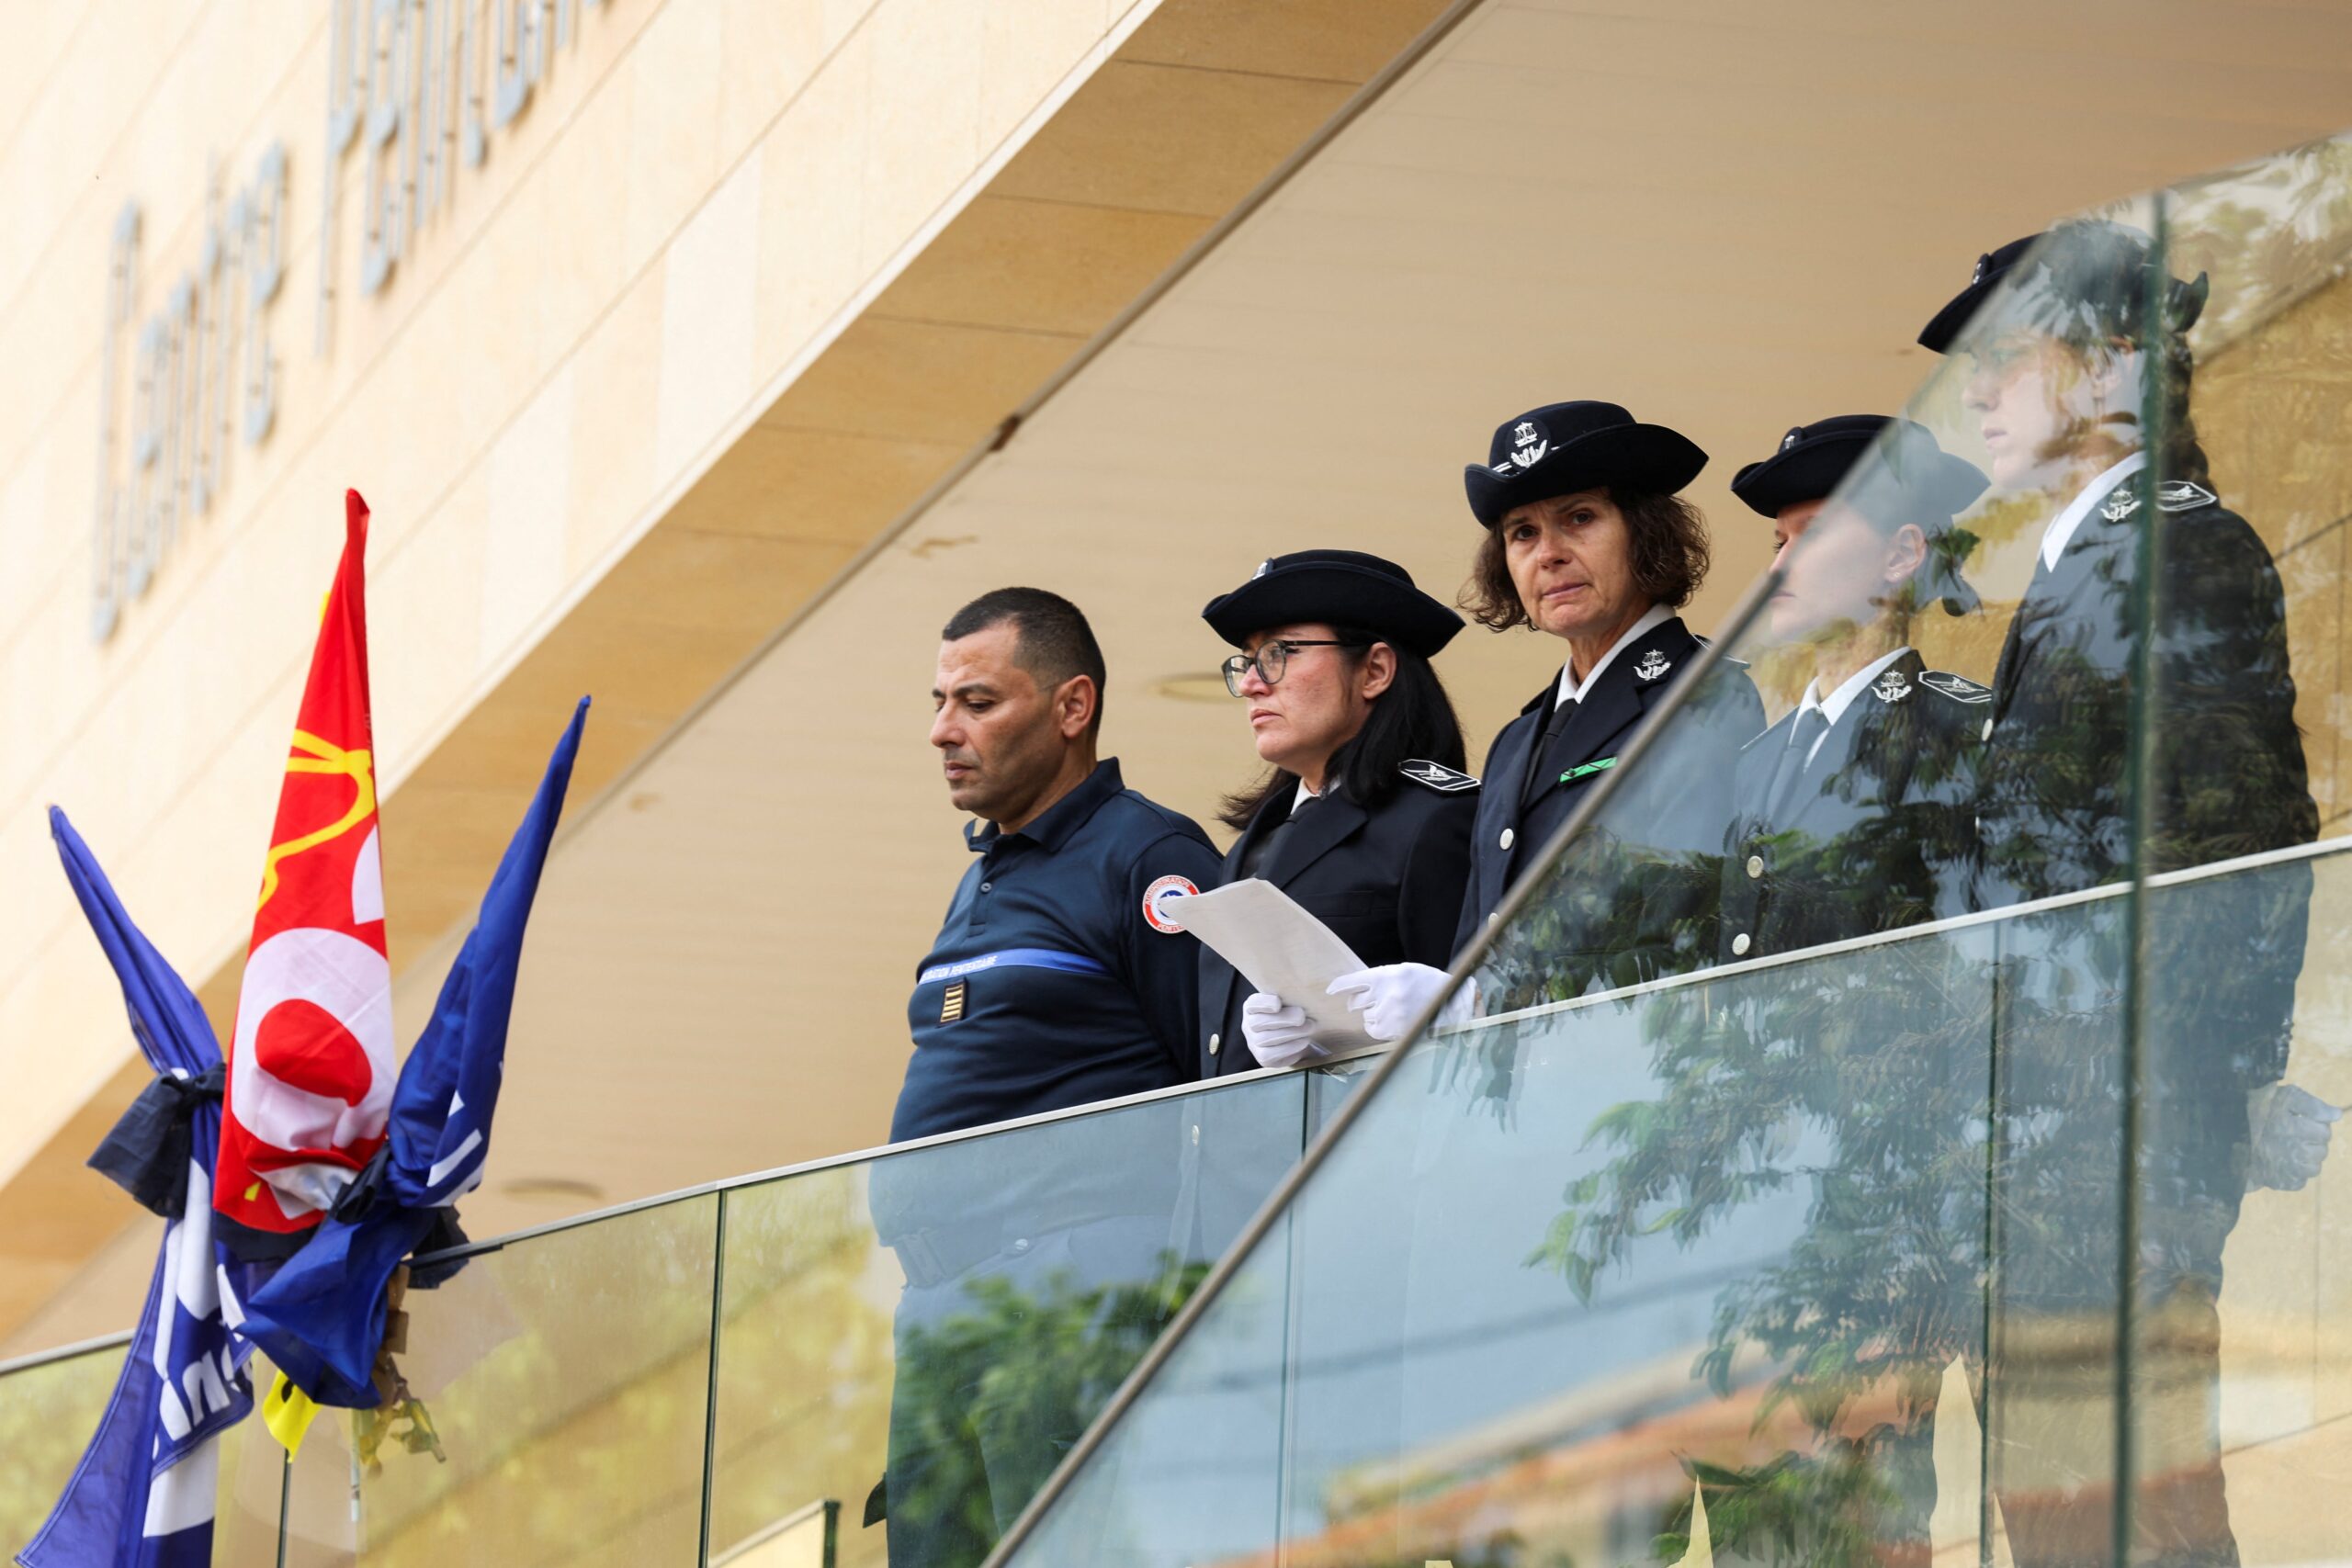 Director of Baumettes Penitentiary Lagier Karine along with members of law enforcement observe a moment of silence on the day of a symbolic one-day shutdown of the country's jails